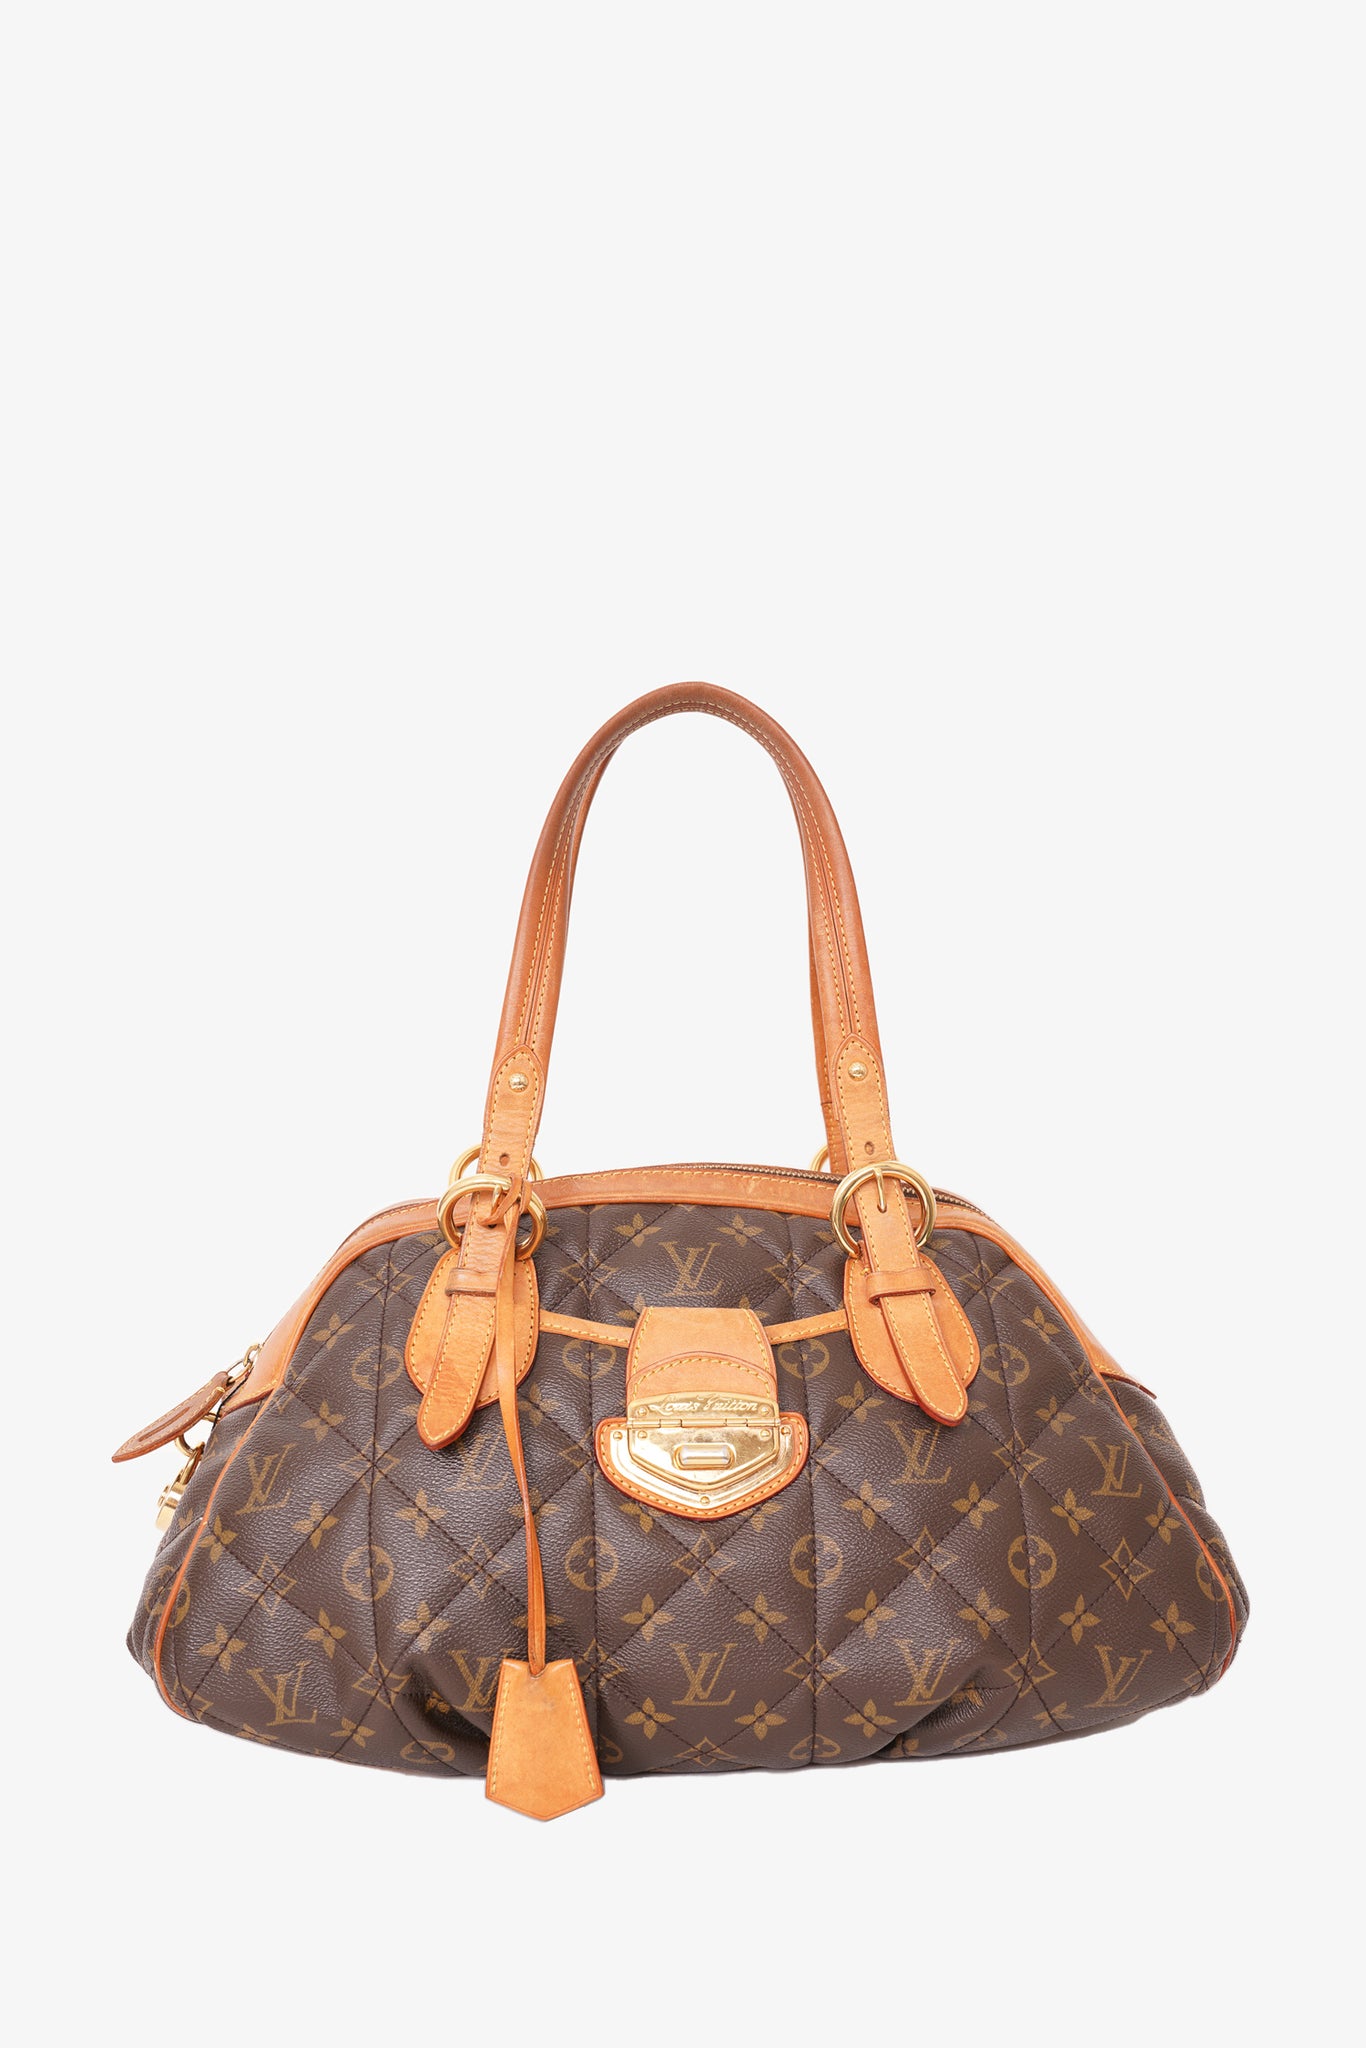 Louis Vuitton Totally PM Monogram - clothing & accessories - by owner -  apparel sale - craigslist